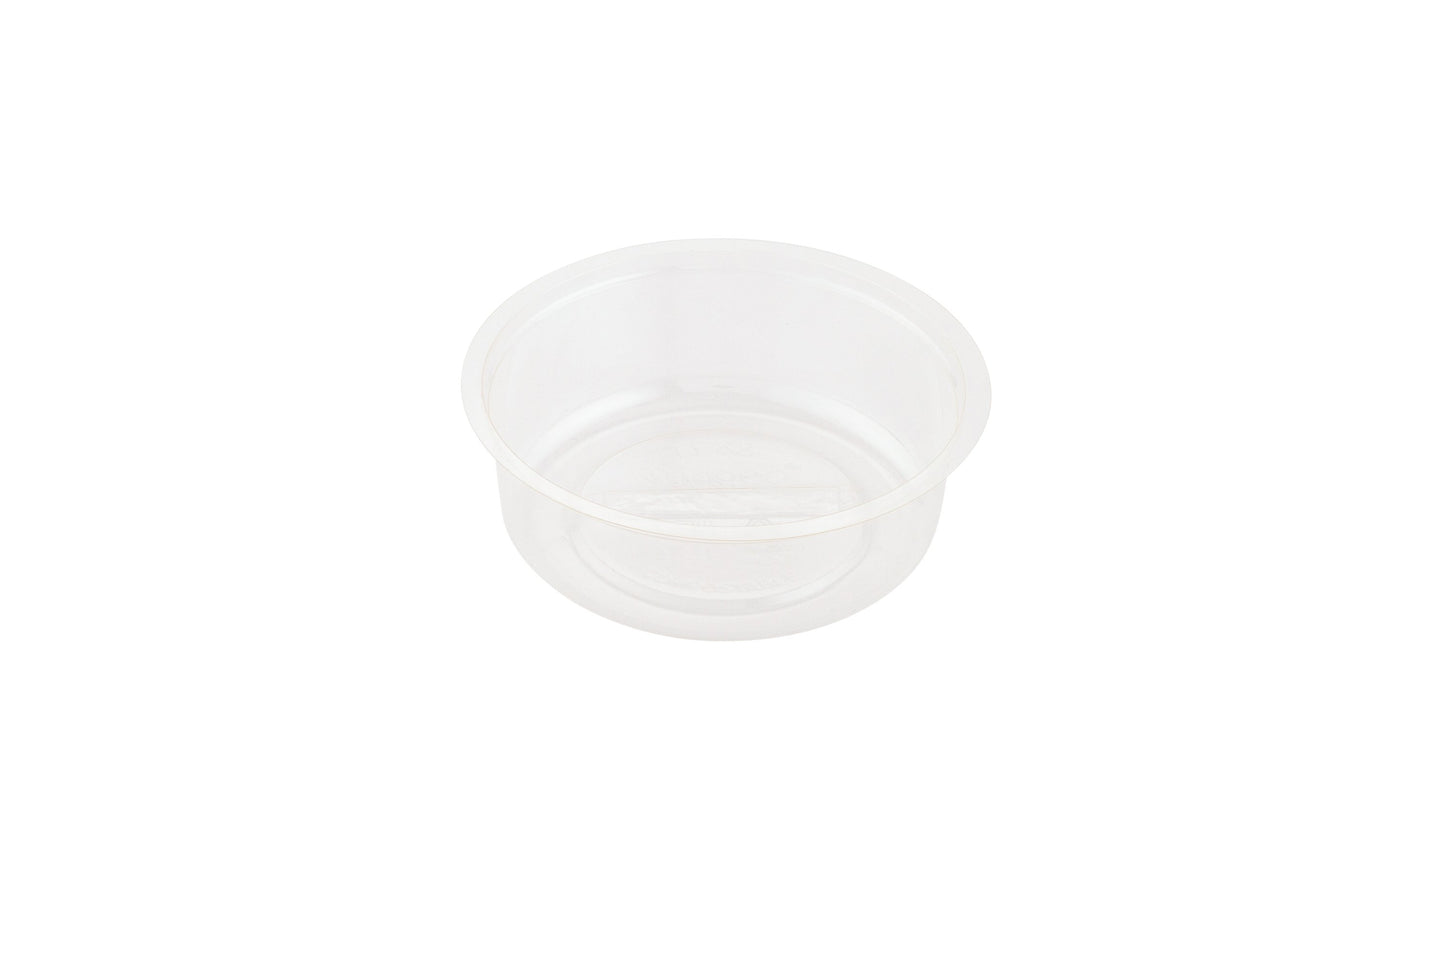 Basic Nature 4 oz Round Clear PLA Plastic Topping Cup - Compostable, Fits Drinking Cups - 3 1/2" x 3 1/2" x 1" - 1000 count box